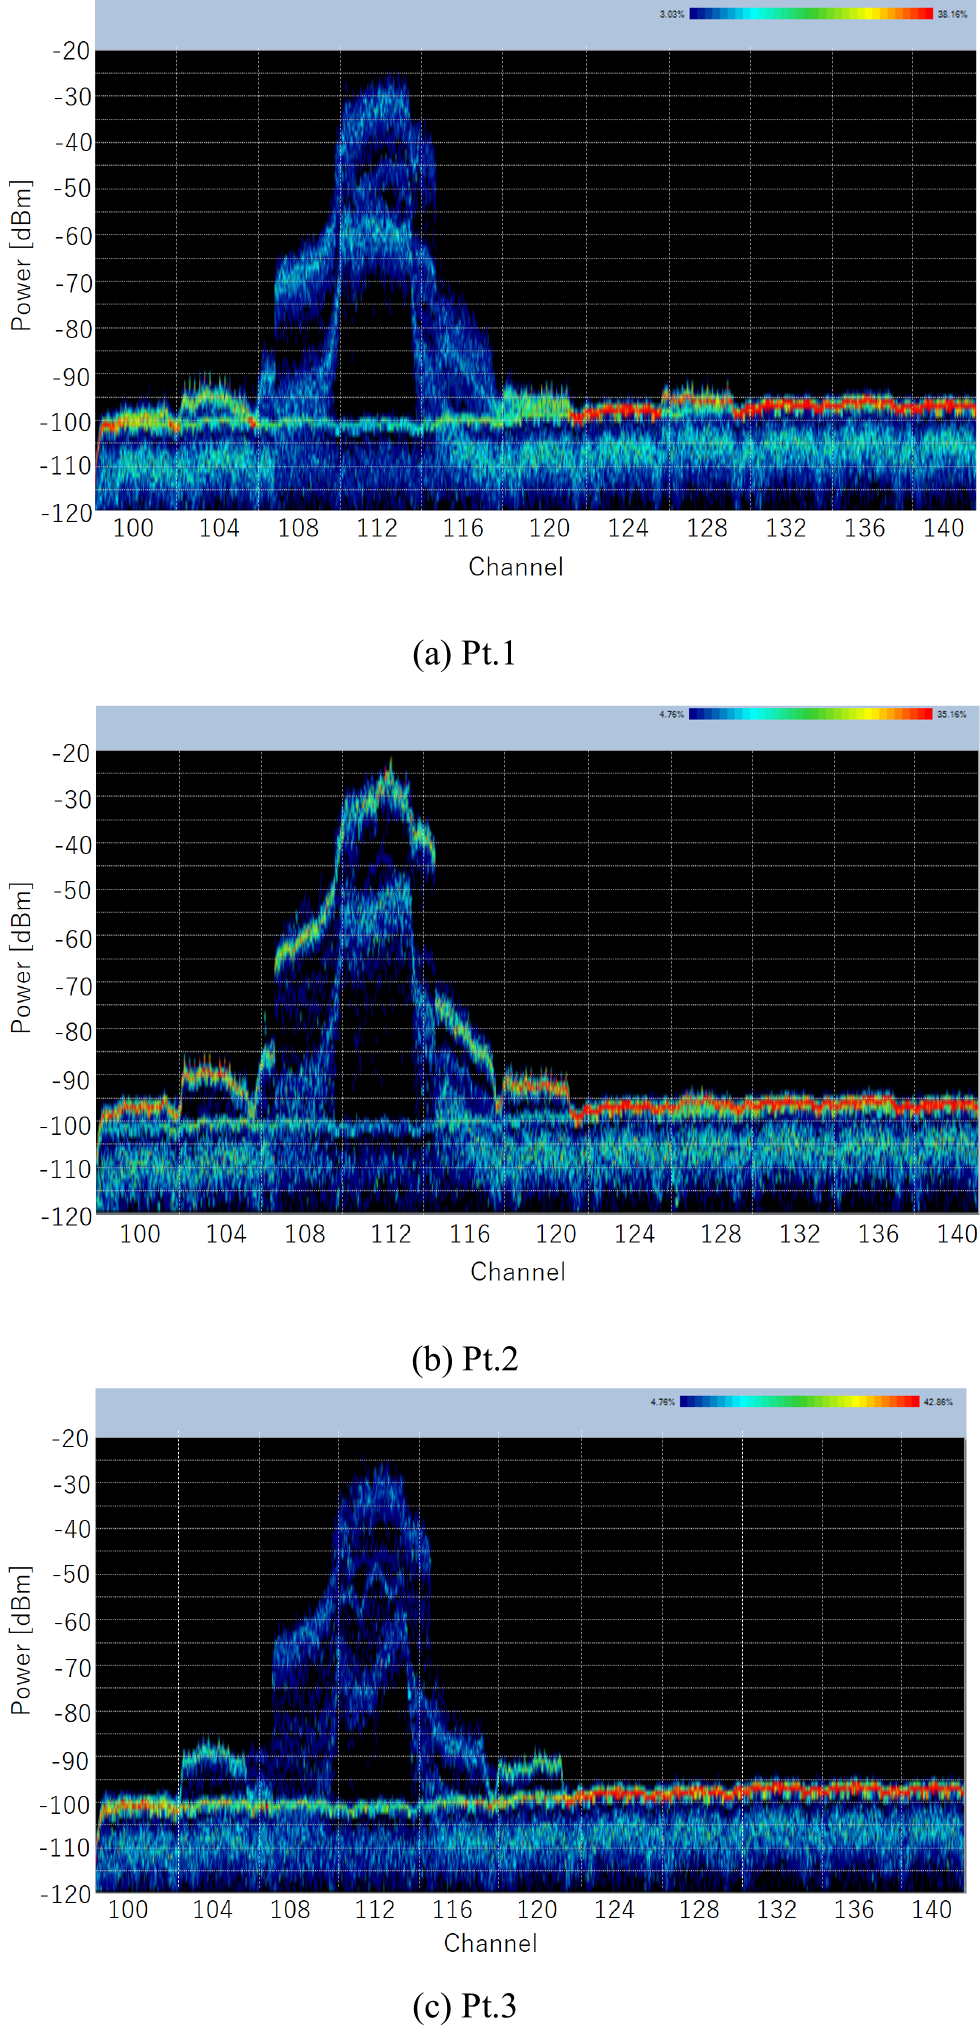 112chに設定した競合APのスペクトラム　Power spectrum of output signal from C-AP (112ch).